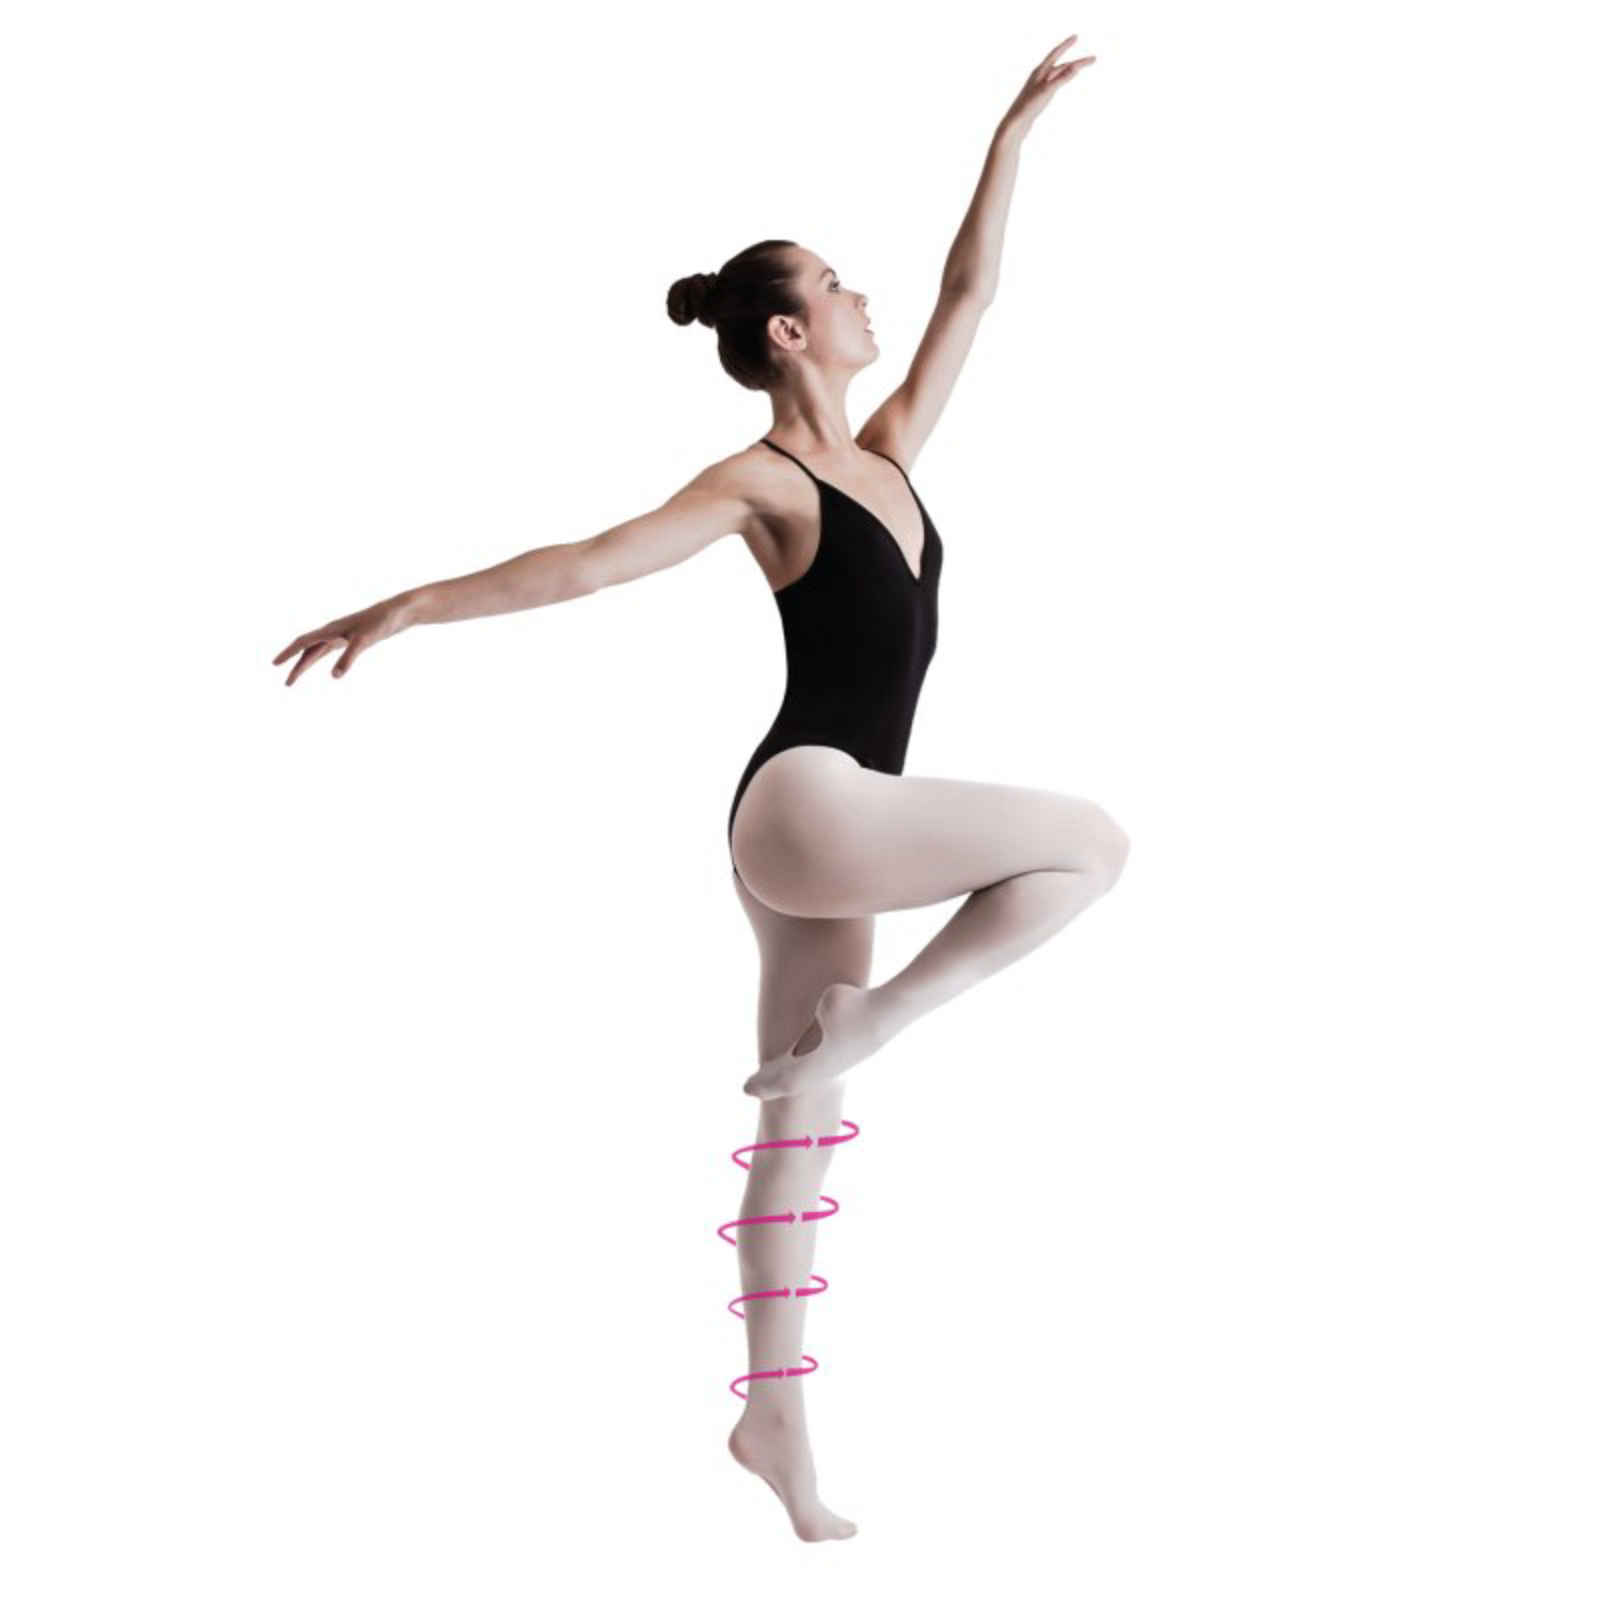 SILKY' BRAND SUPPORT+ 70 DENIER THEATRICAL PINK CONVERTIBLE BALLET DANCE  TIGHTS